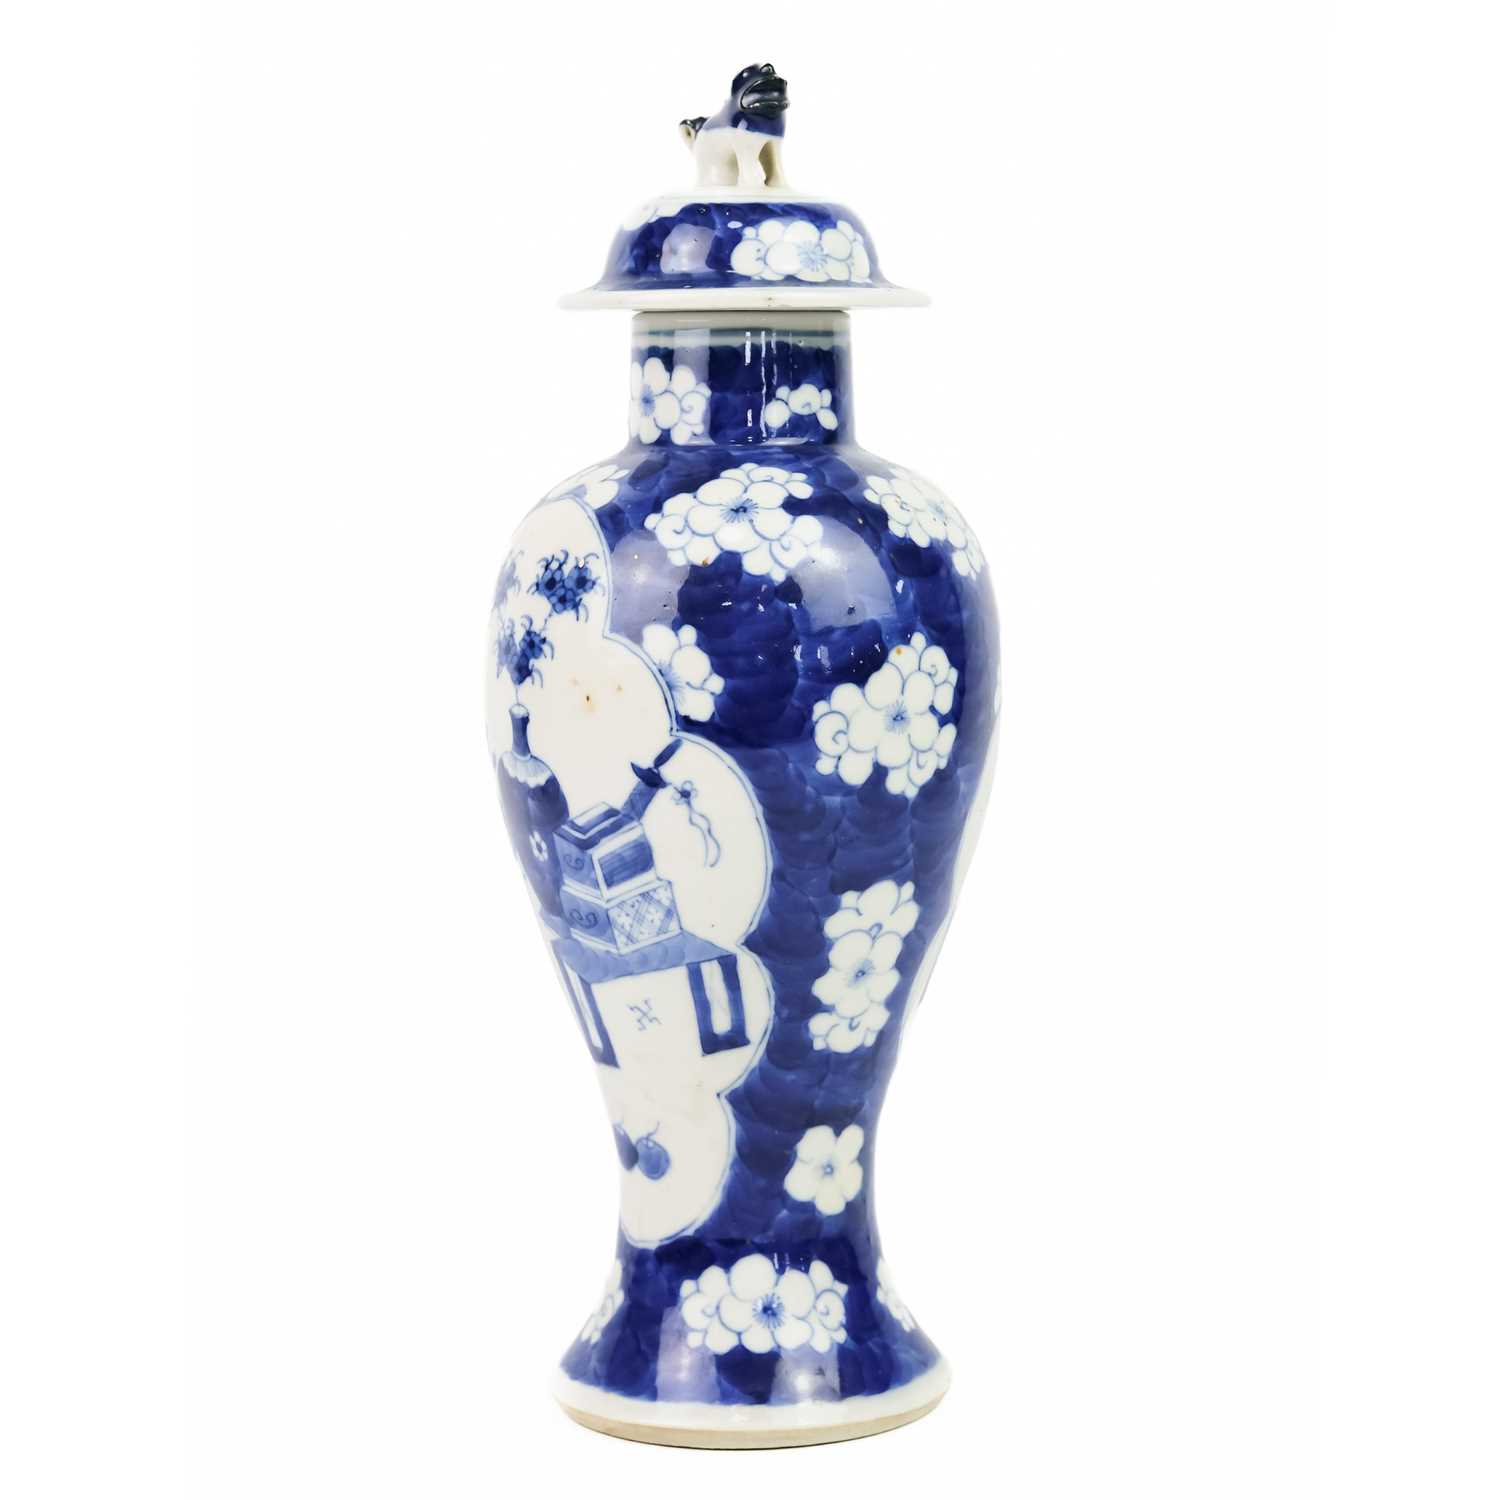 A Chinese blue and white prunus blossom porcelain vase, late 19th century. - Image 3 of 8